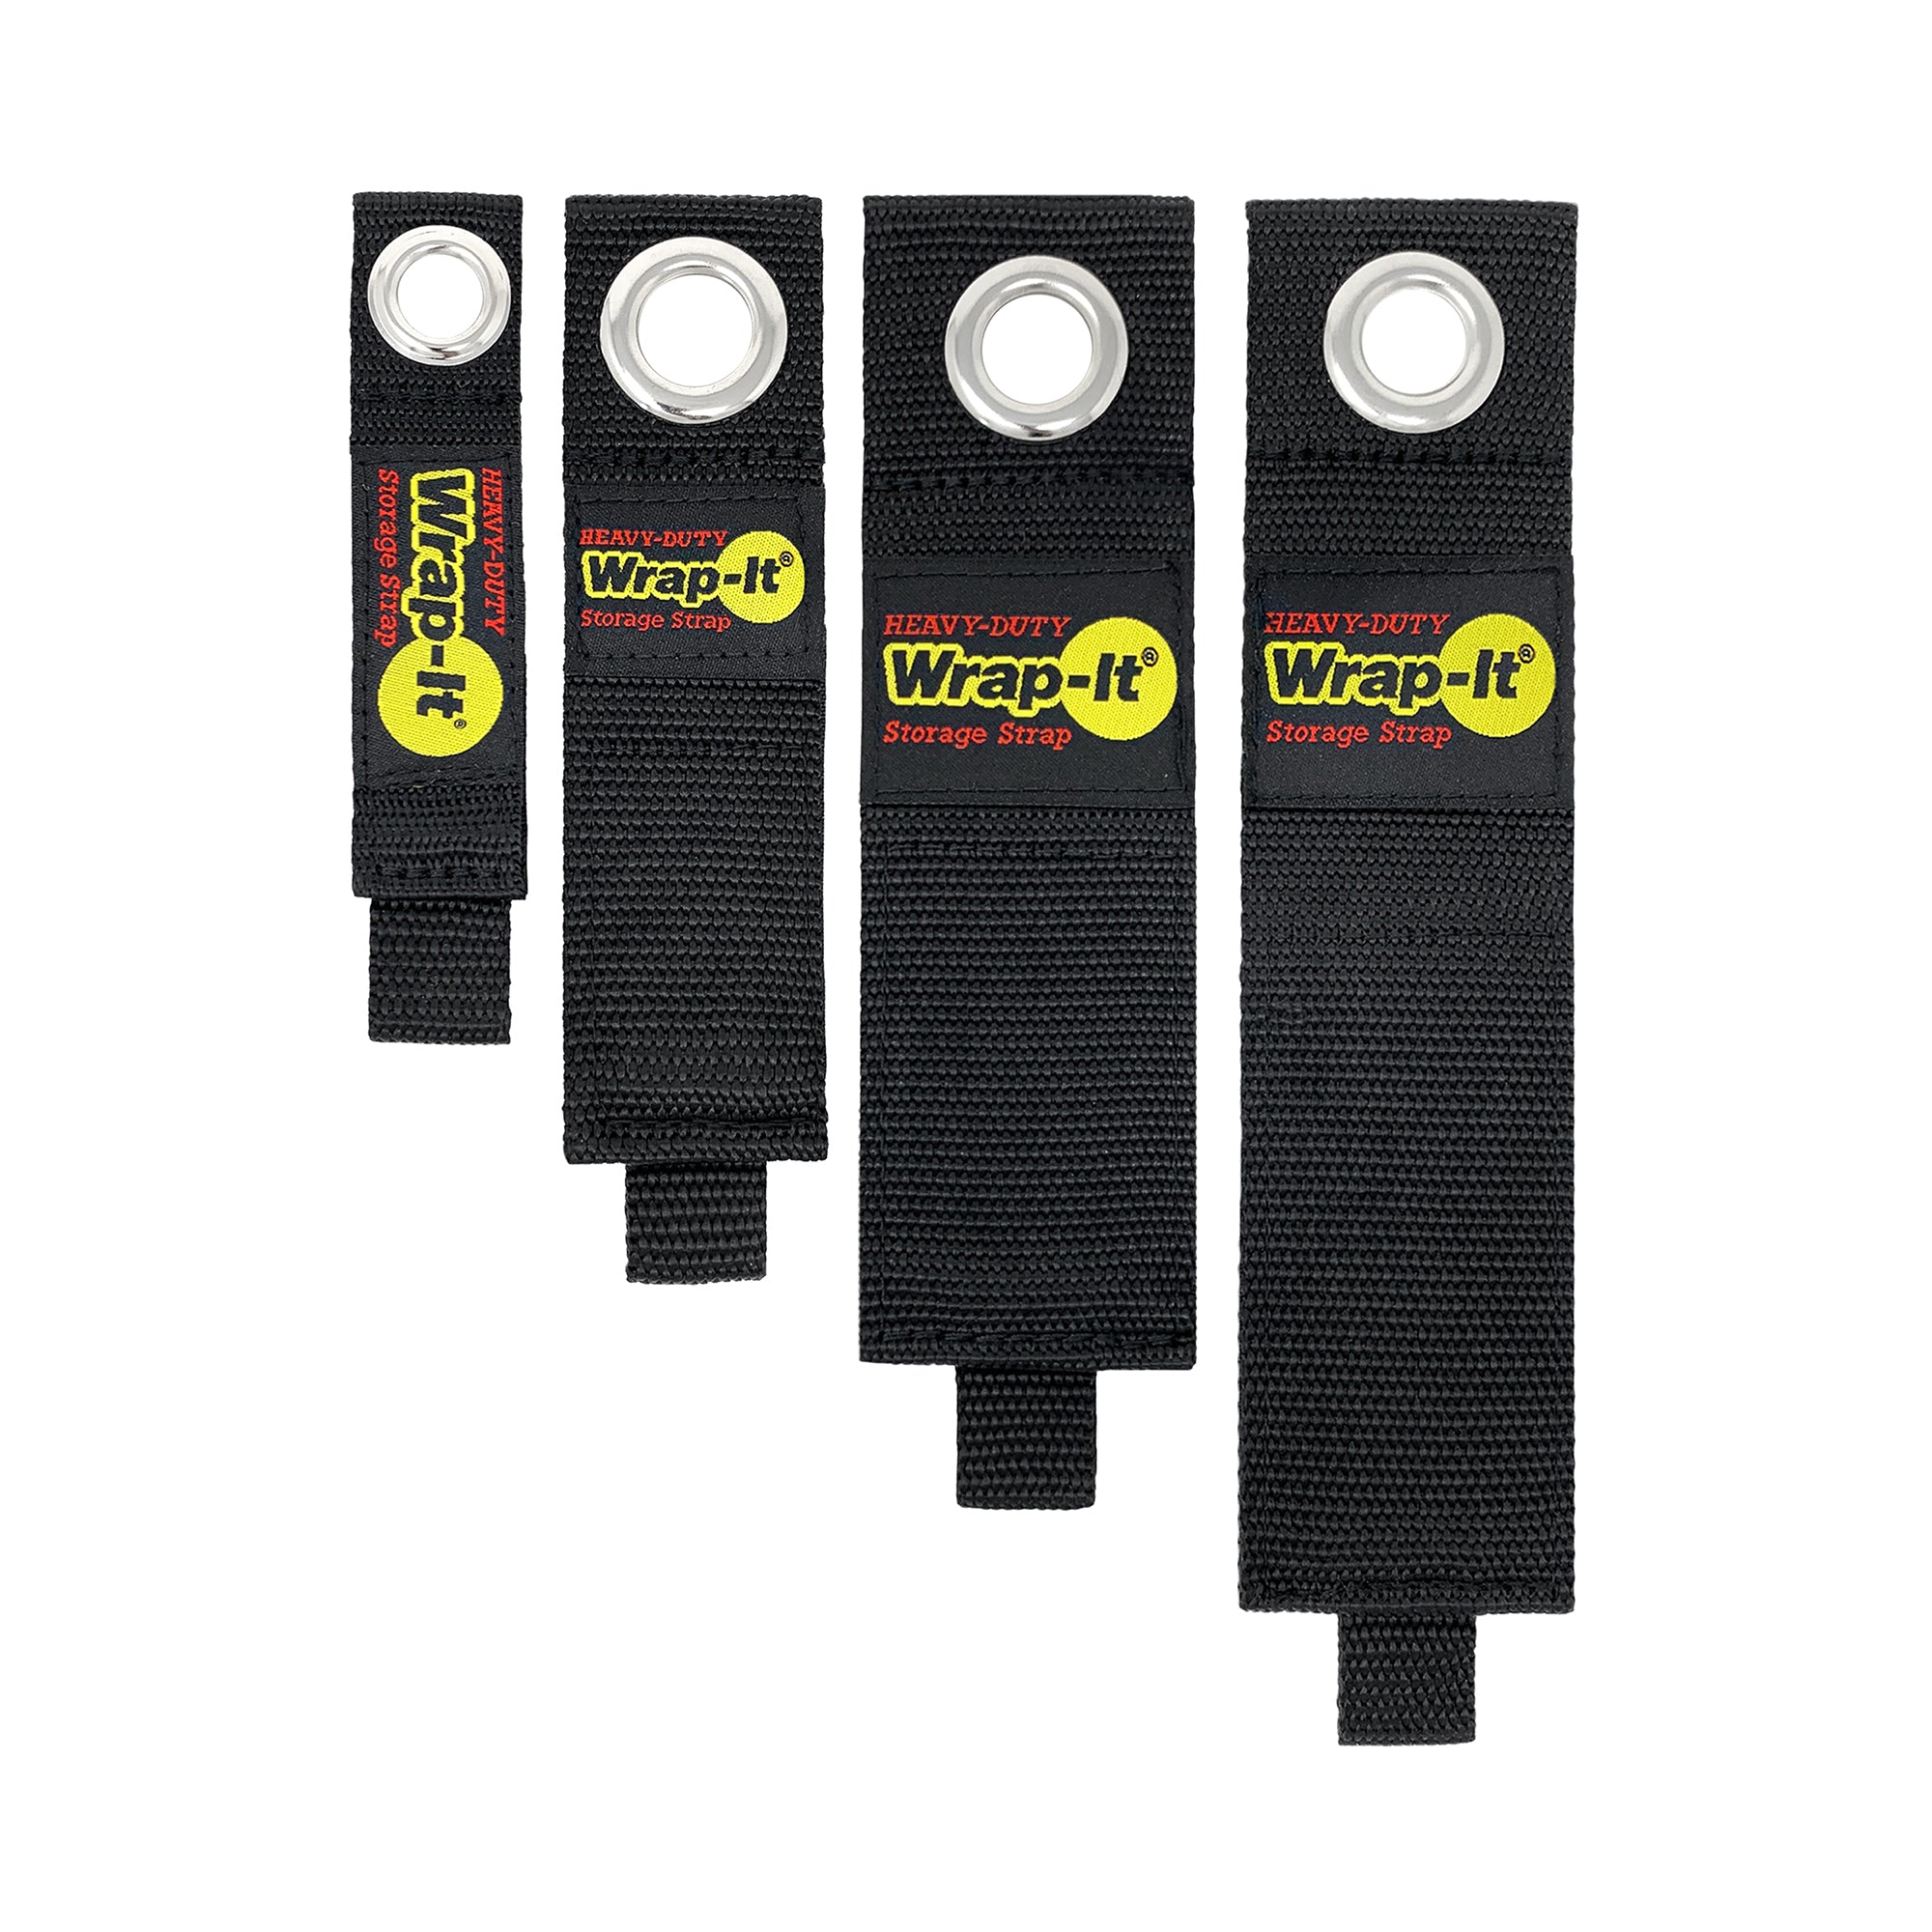 Wrap-It 7 in. Heavy-Duty Storage Straps, 4-Pack at Tractor Supply Co.